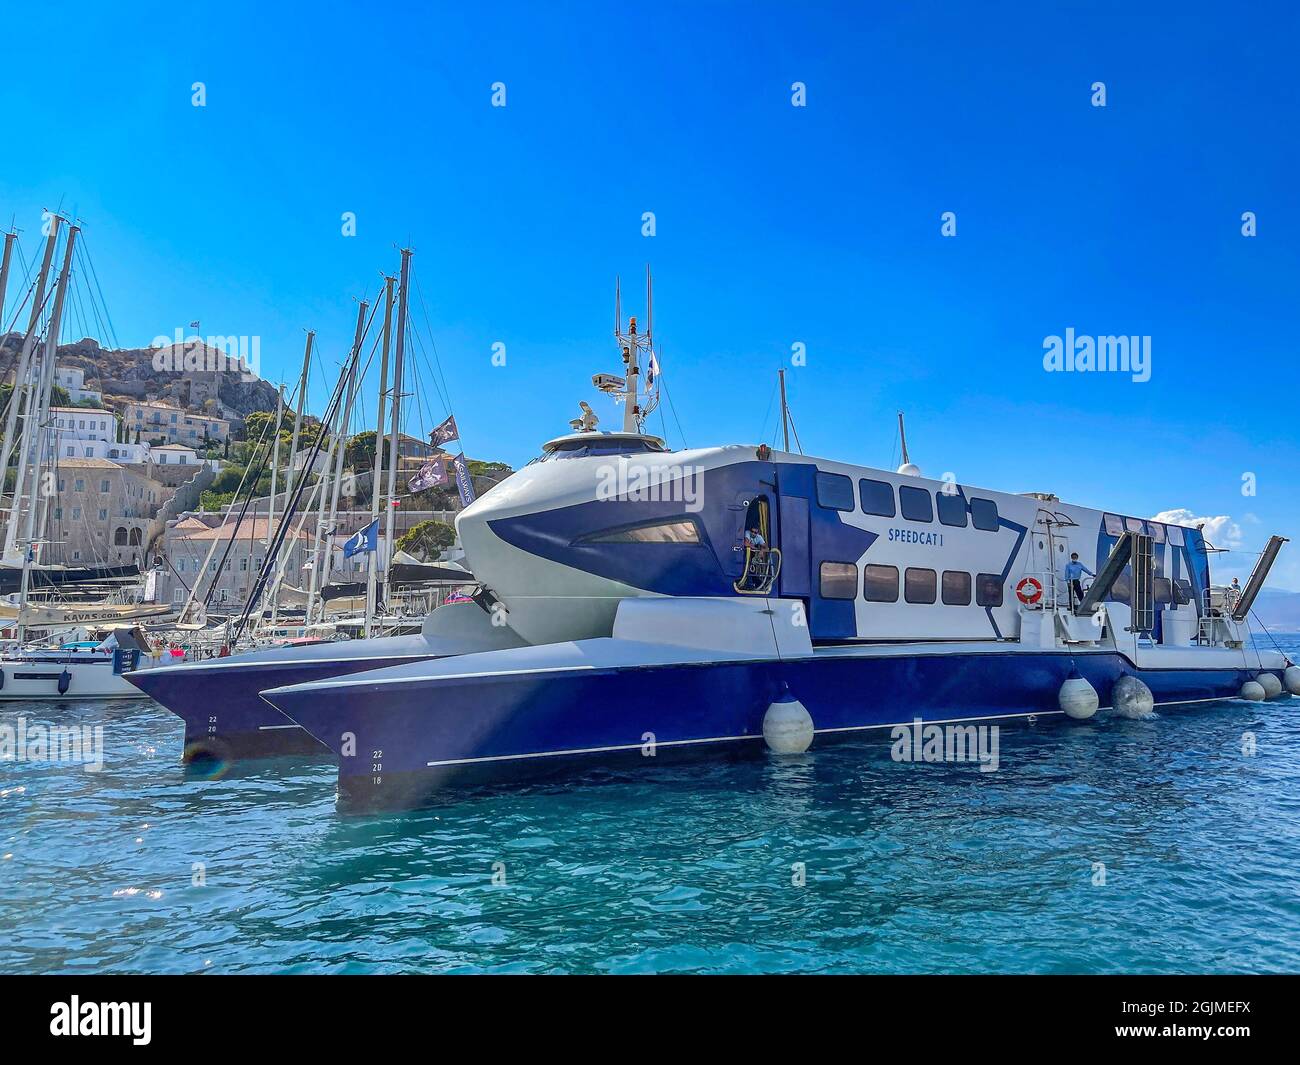 The new Speed Cat Passenger Catamaran arriving in Hydra island, Greece. The Speed Cat from Alpha Lines, Launched for the Saronic Islands on 10 April, Stock Photo